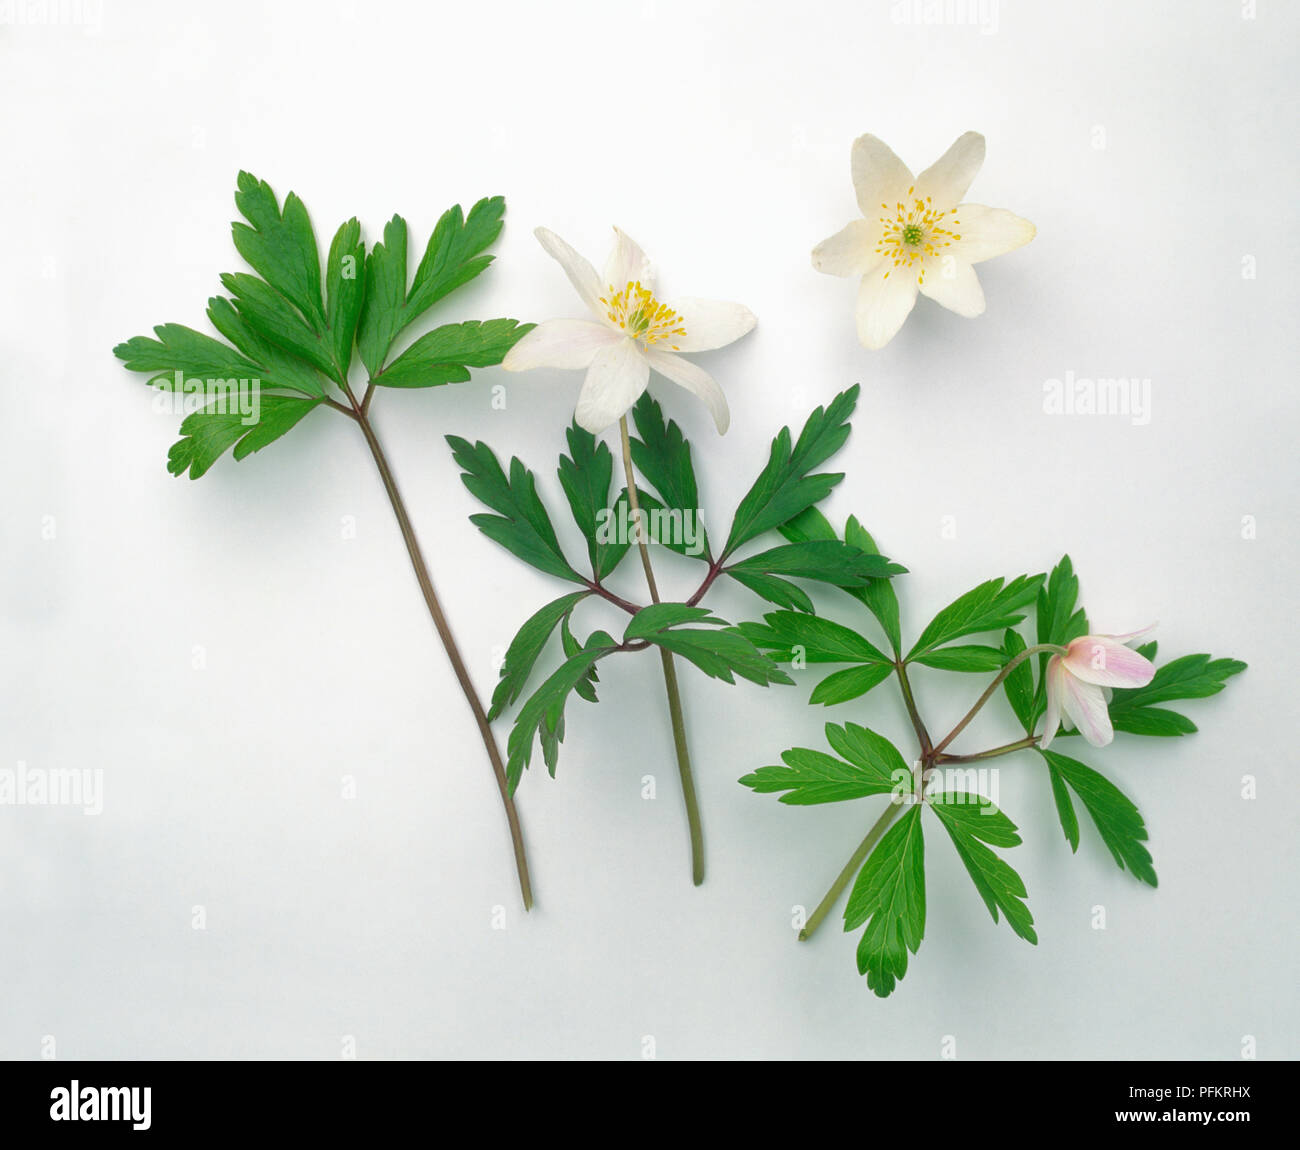 Anemone nemorosa (Wood anemone), star shaped white flowers, and green leaves, close-up Stock Photo